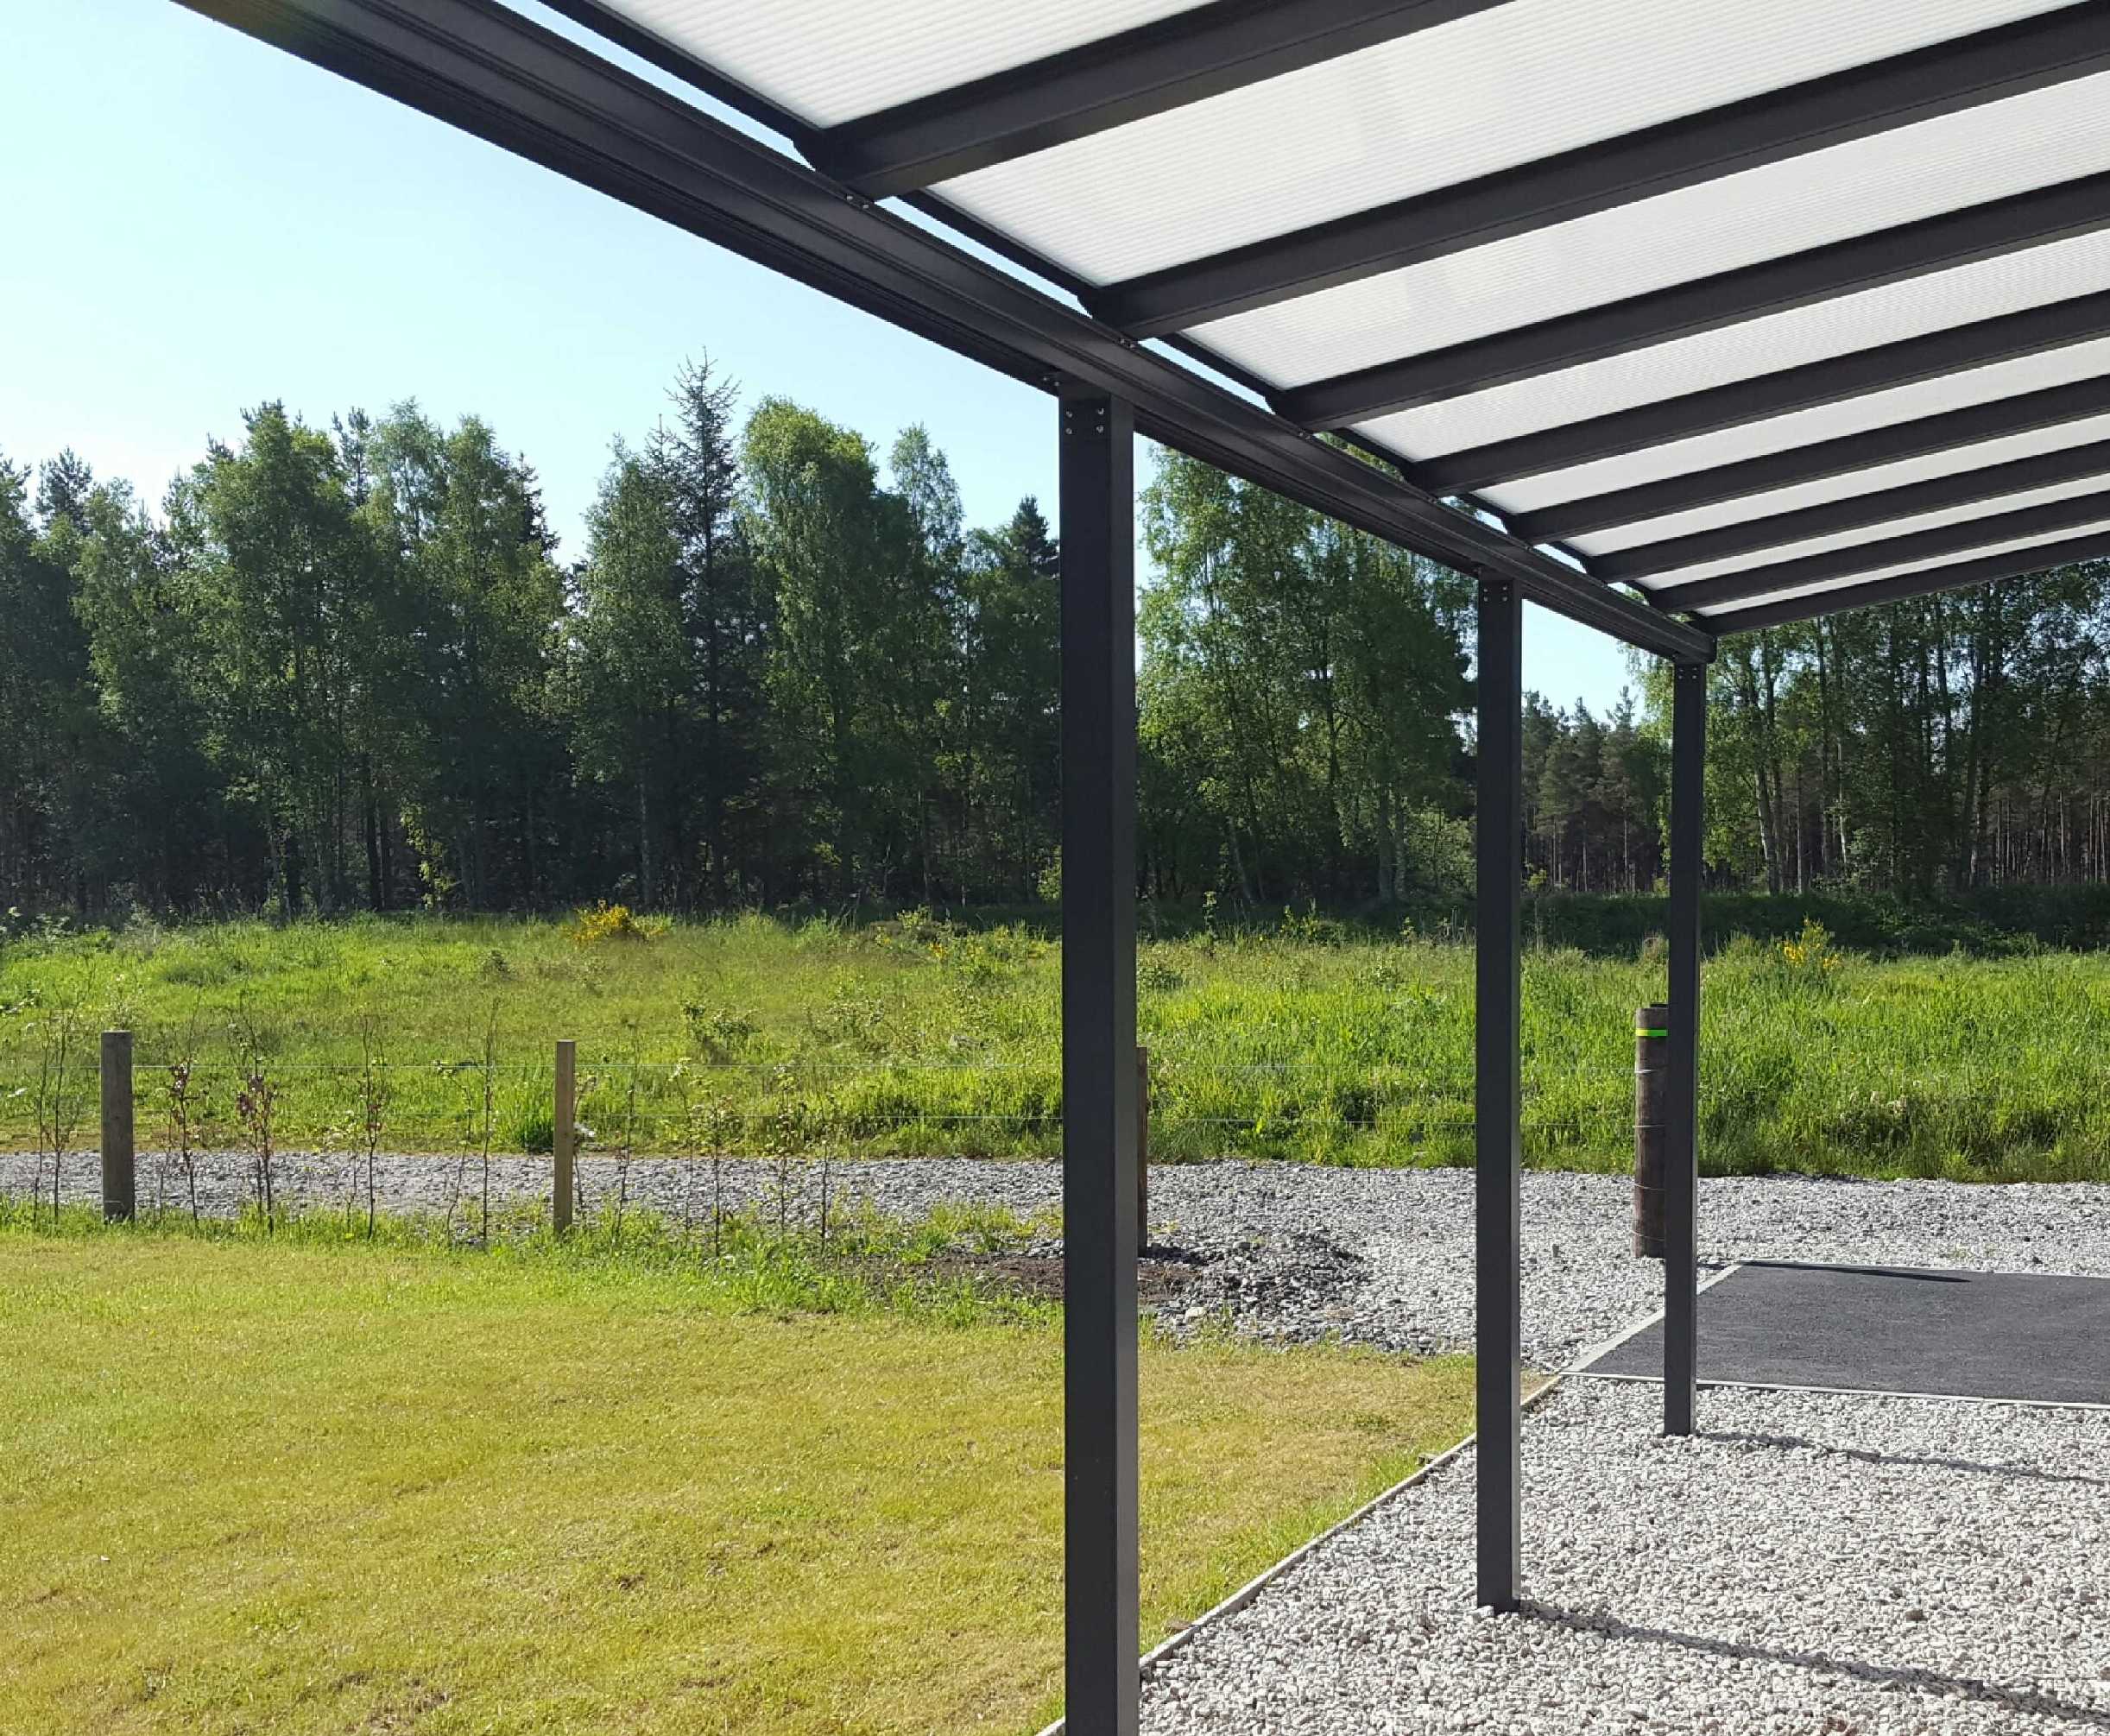 SPECIAL OFFER Omega Smart Lean-To Canopy, Anthracite Grey, 16mm Polycarbonate Glazing - 3.1m (W) x 2.5m (P), (2) Supporting Posts